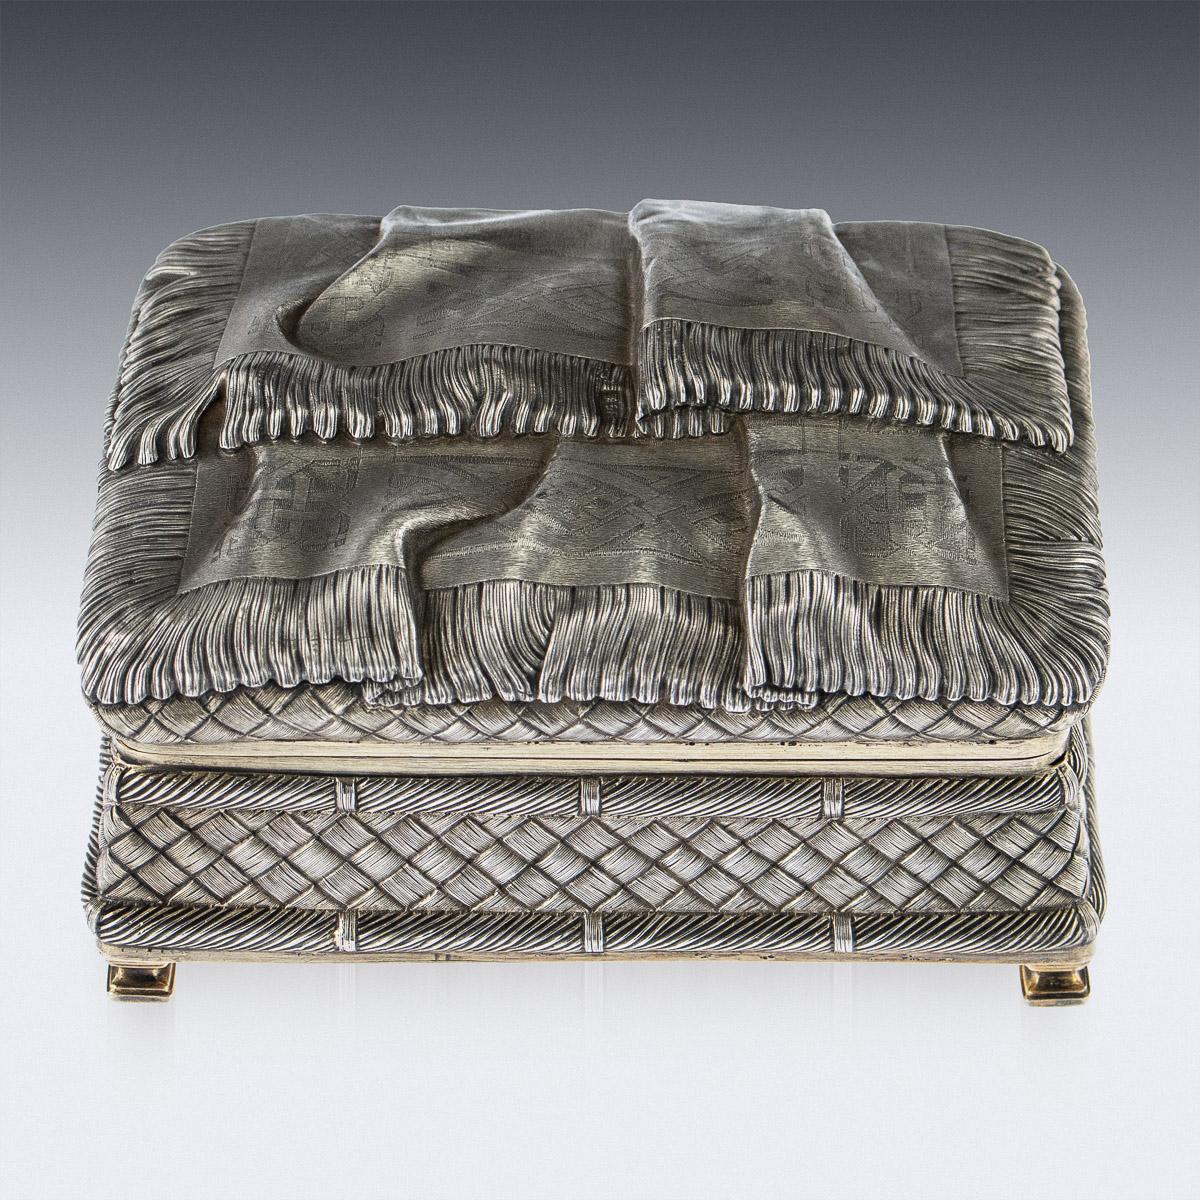 Antique late 19th century Imperial Russian solid silver trompe l'oeil casket box, rectangular shape with canted sides, engraved and repoussé, imitating draped linen over a woven birch bark. Hallmarked Russian Silver 84 (875 standard), Moscow, Makers